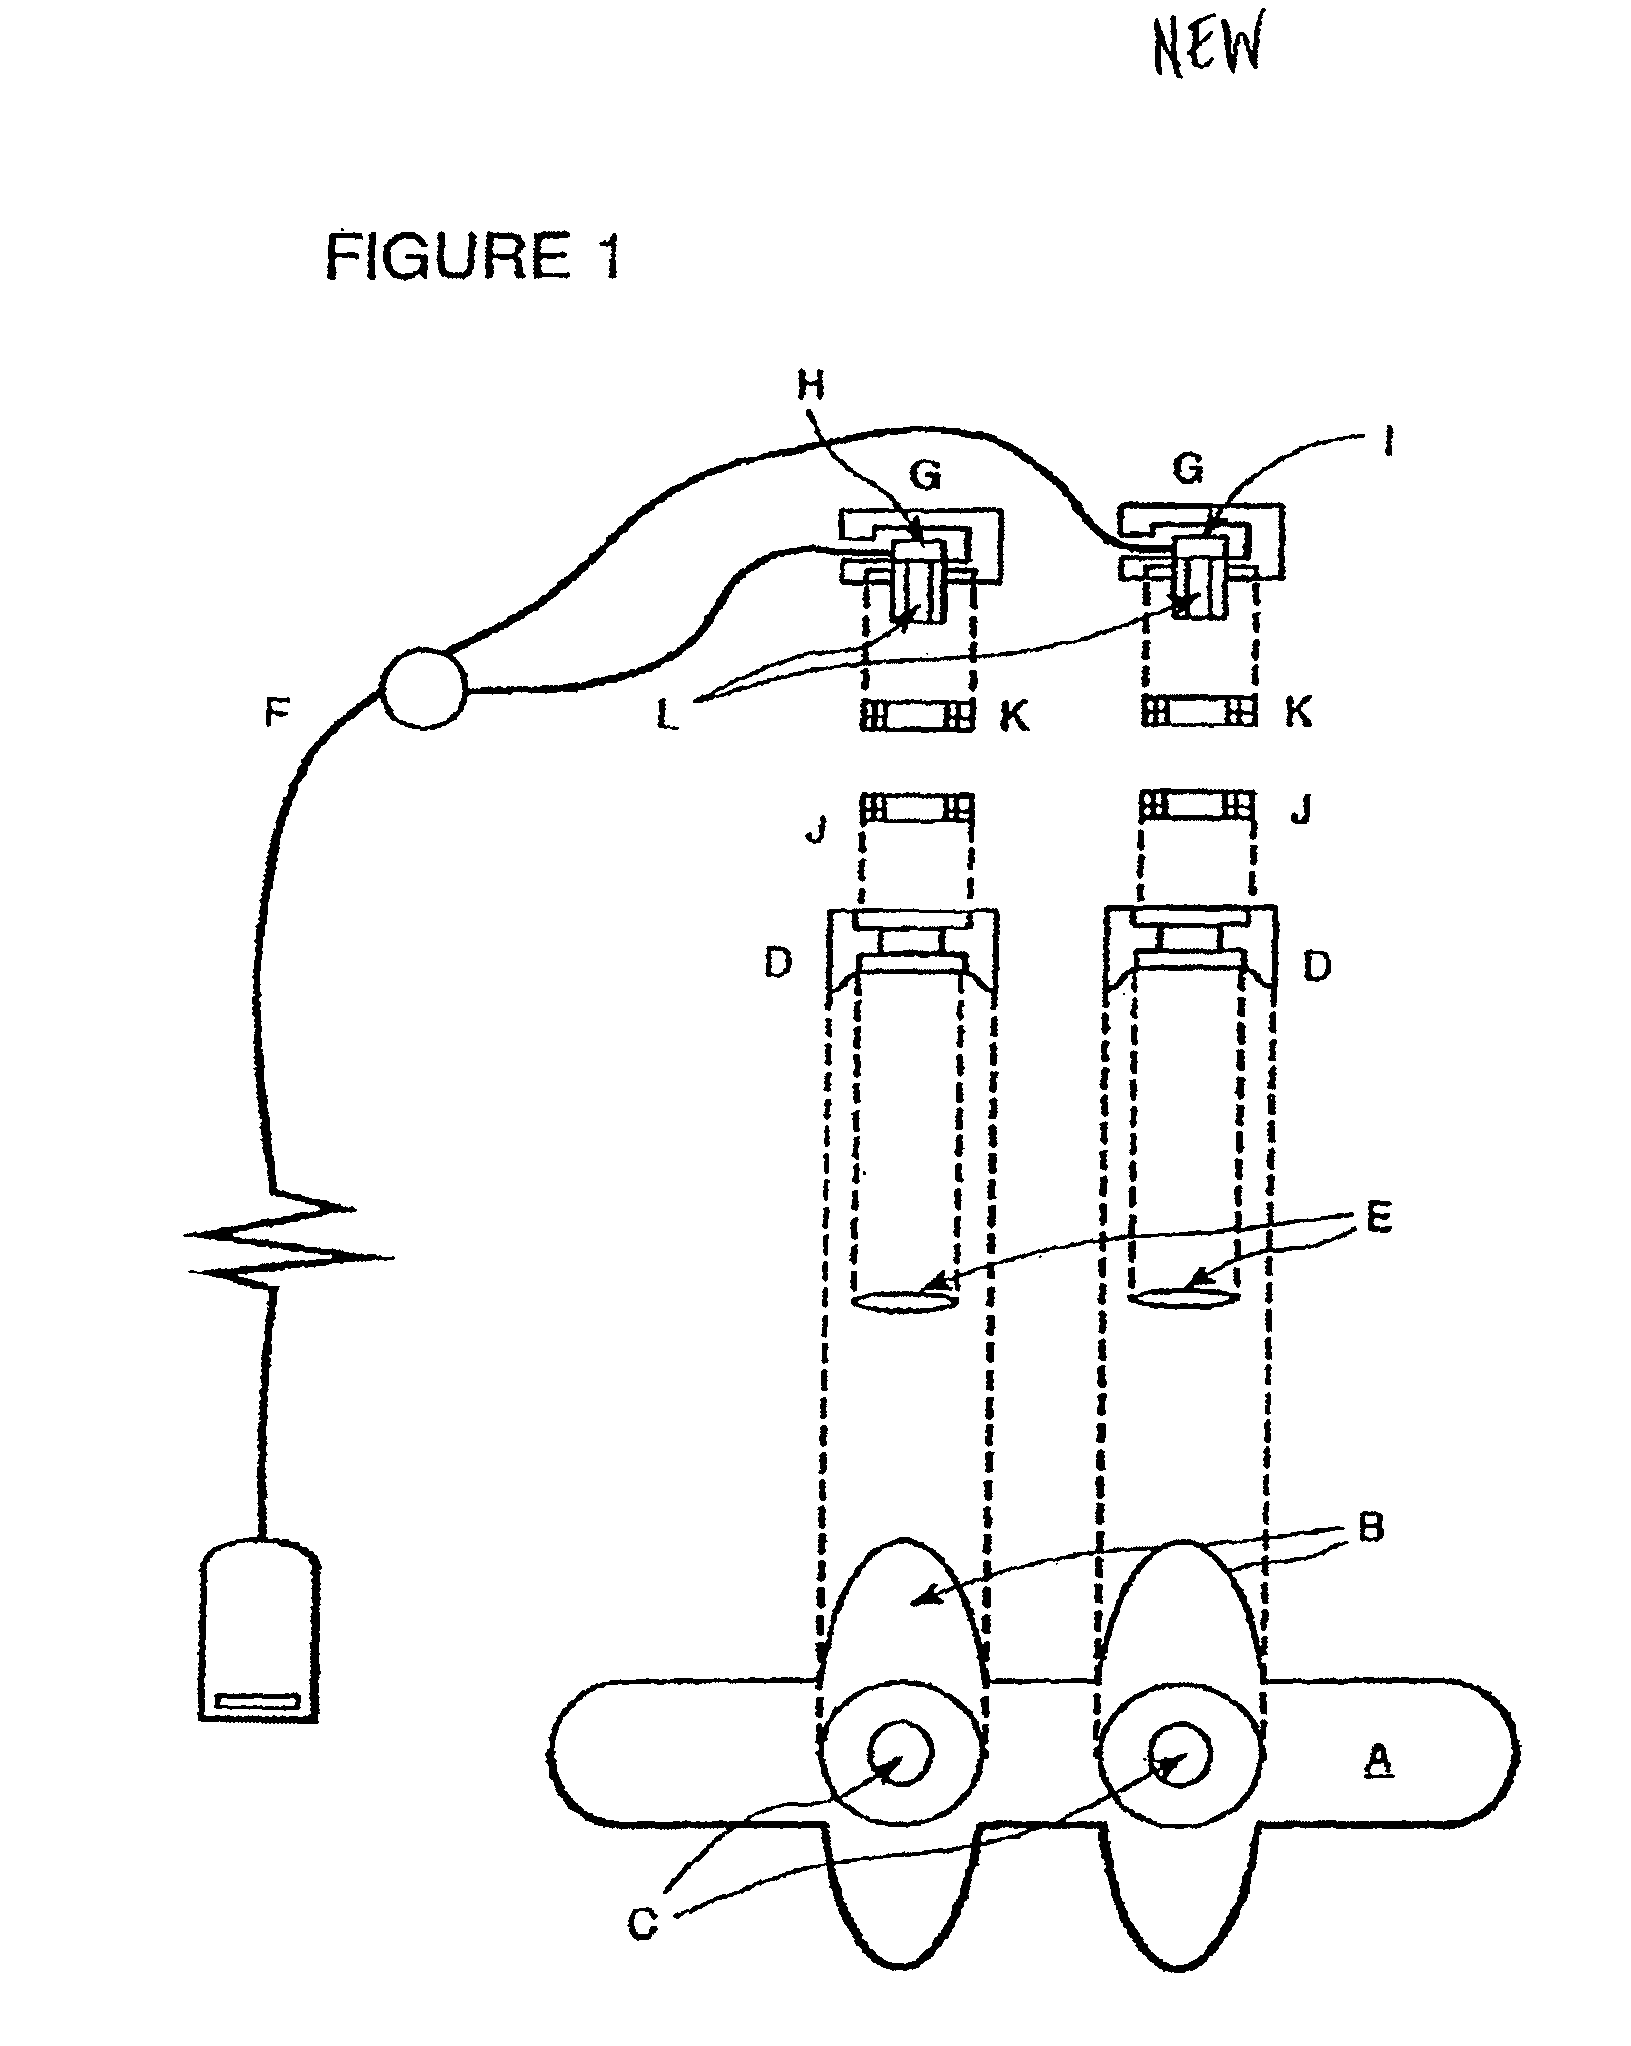 Universal modular pulse oximeter probe for use with reusable and disposable patient attachment devices